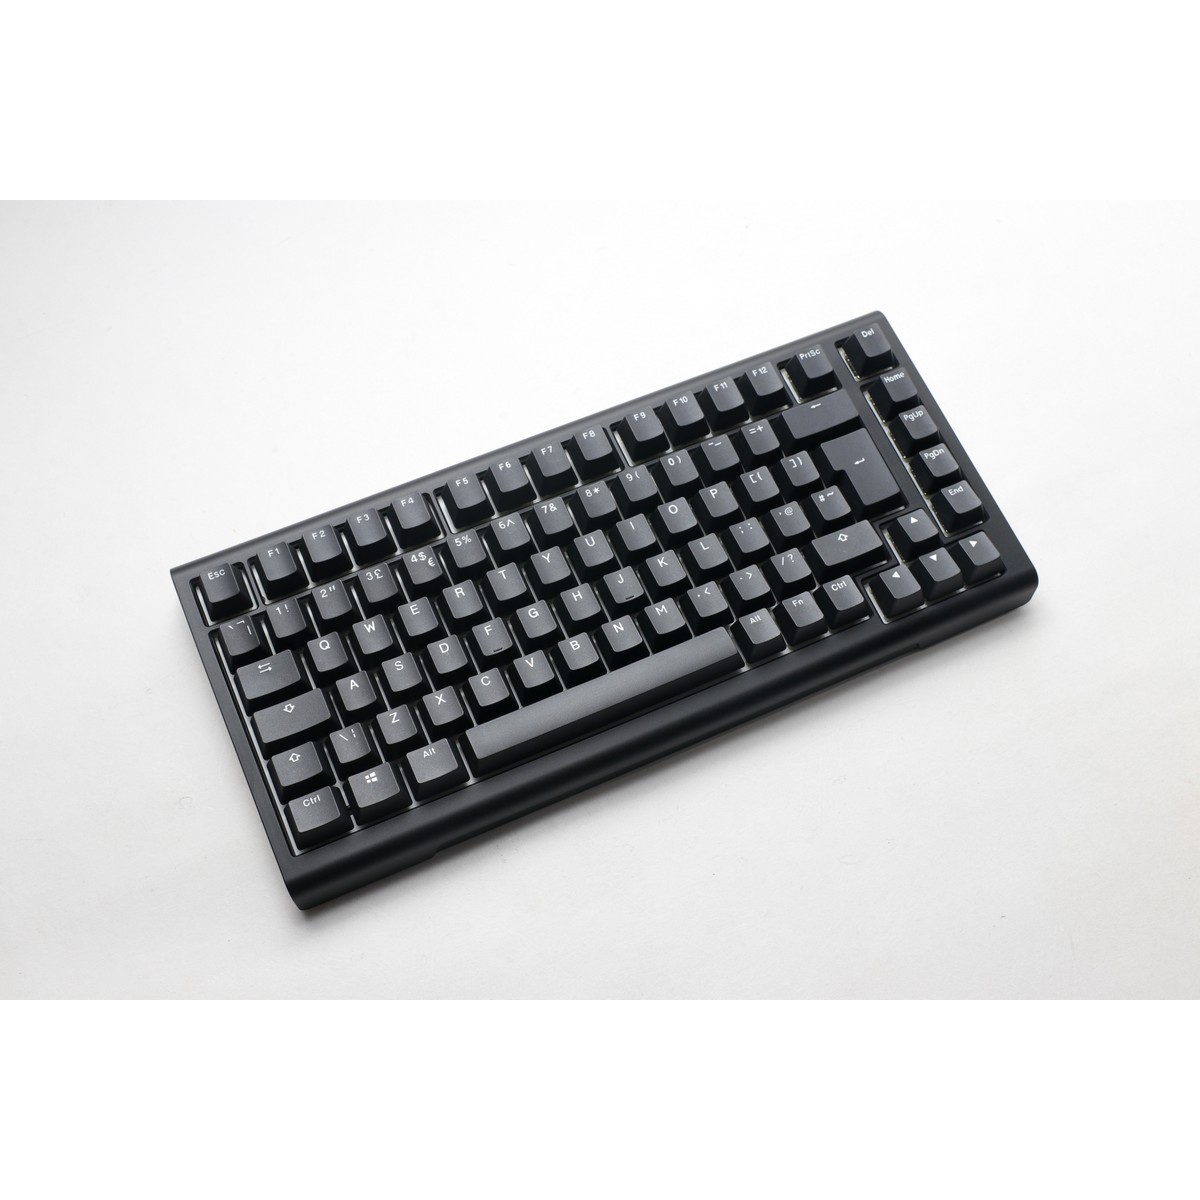 Ducky - Ducky Project D Tinker 75% RGB USB Mechanical Gaming Keyboard Cherry MX Speed Si